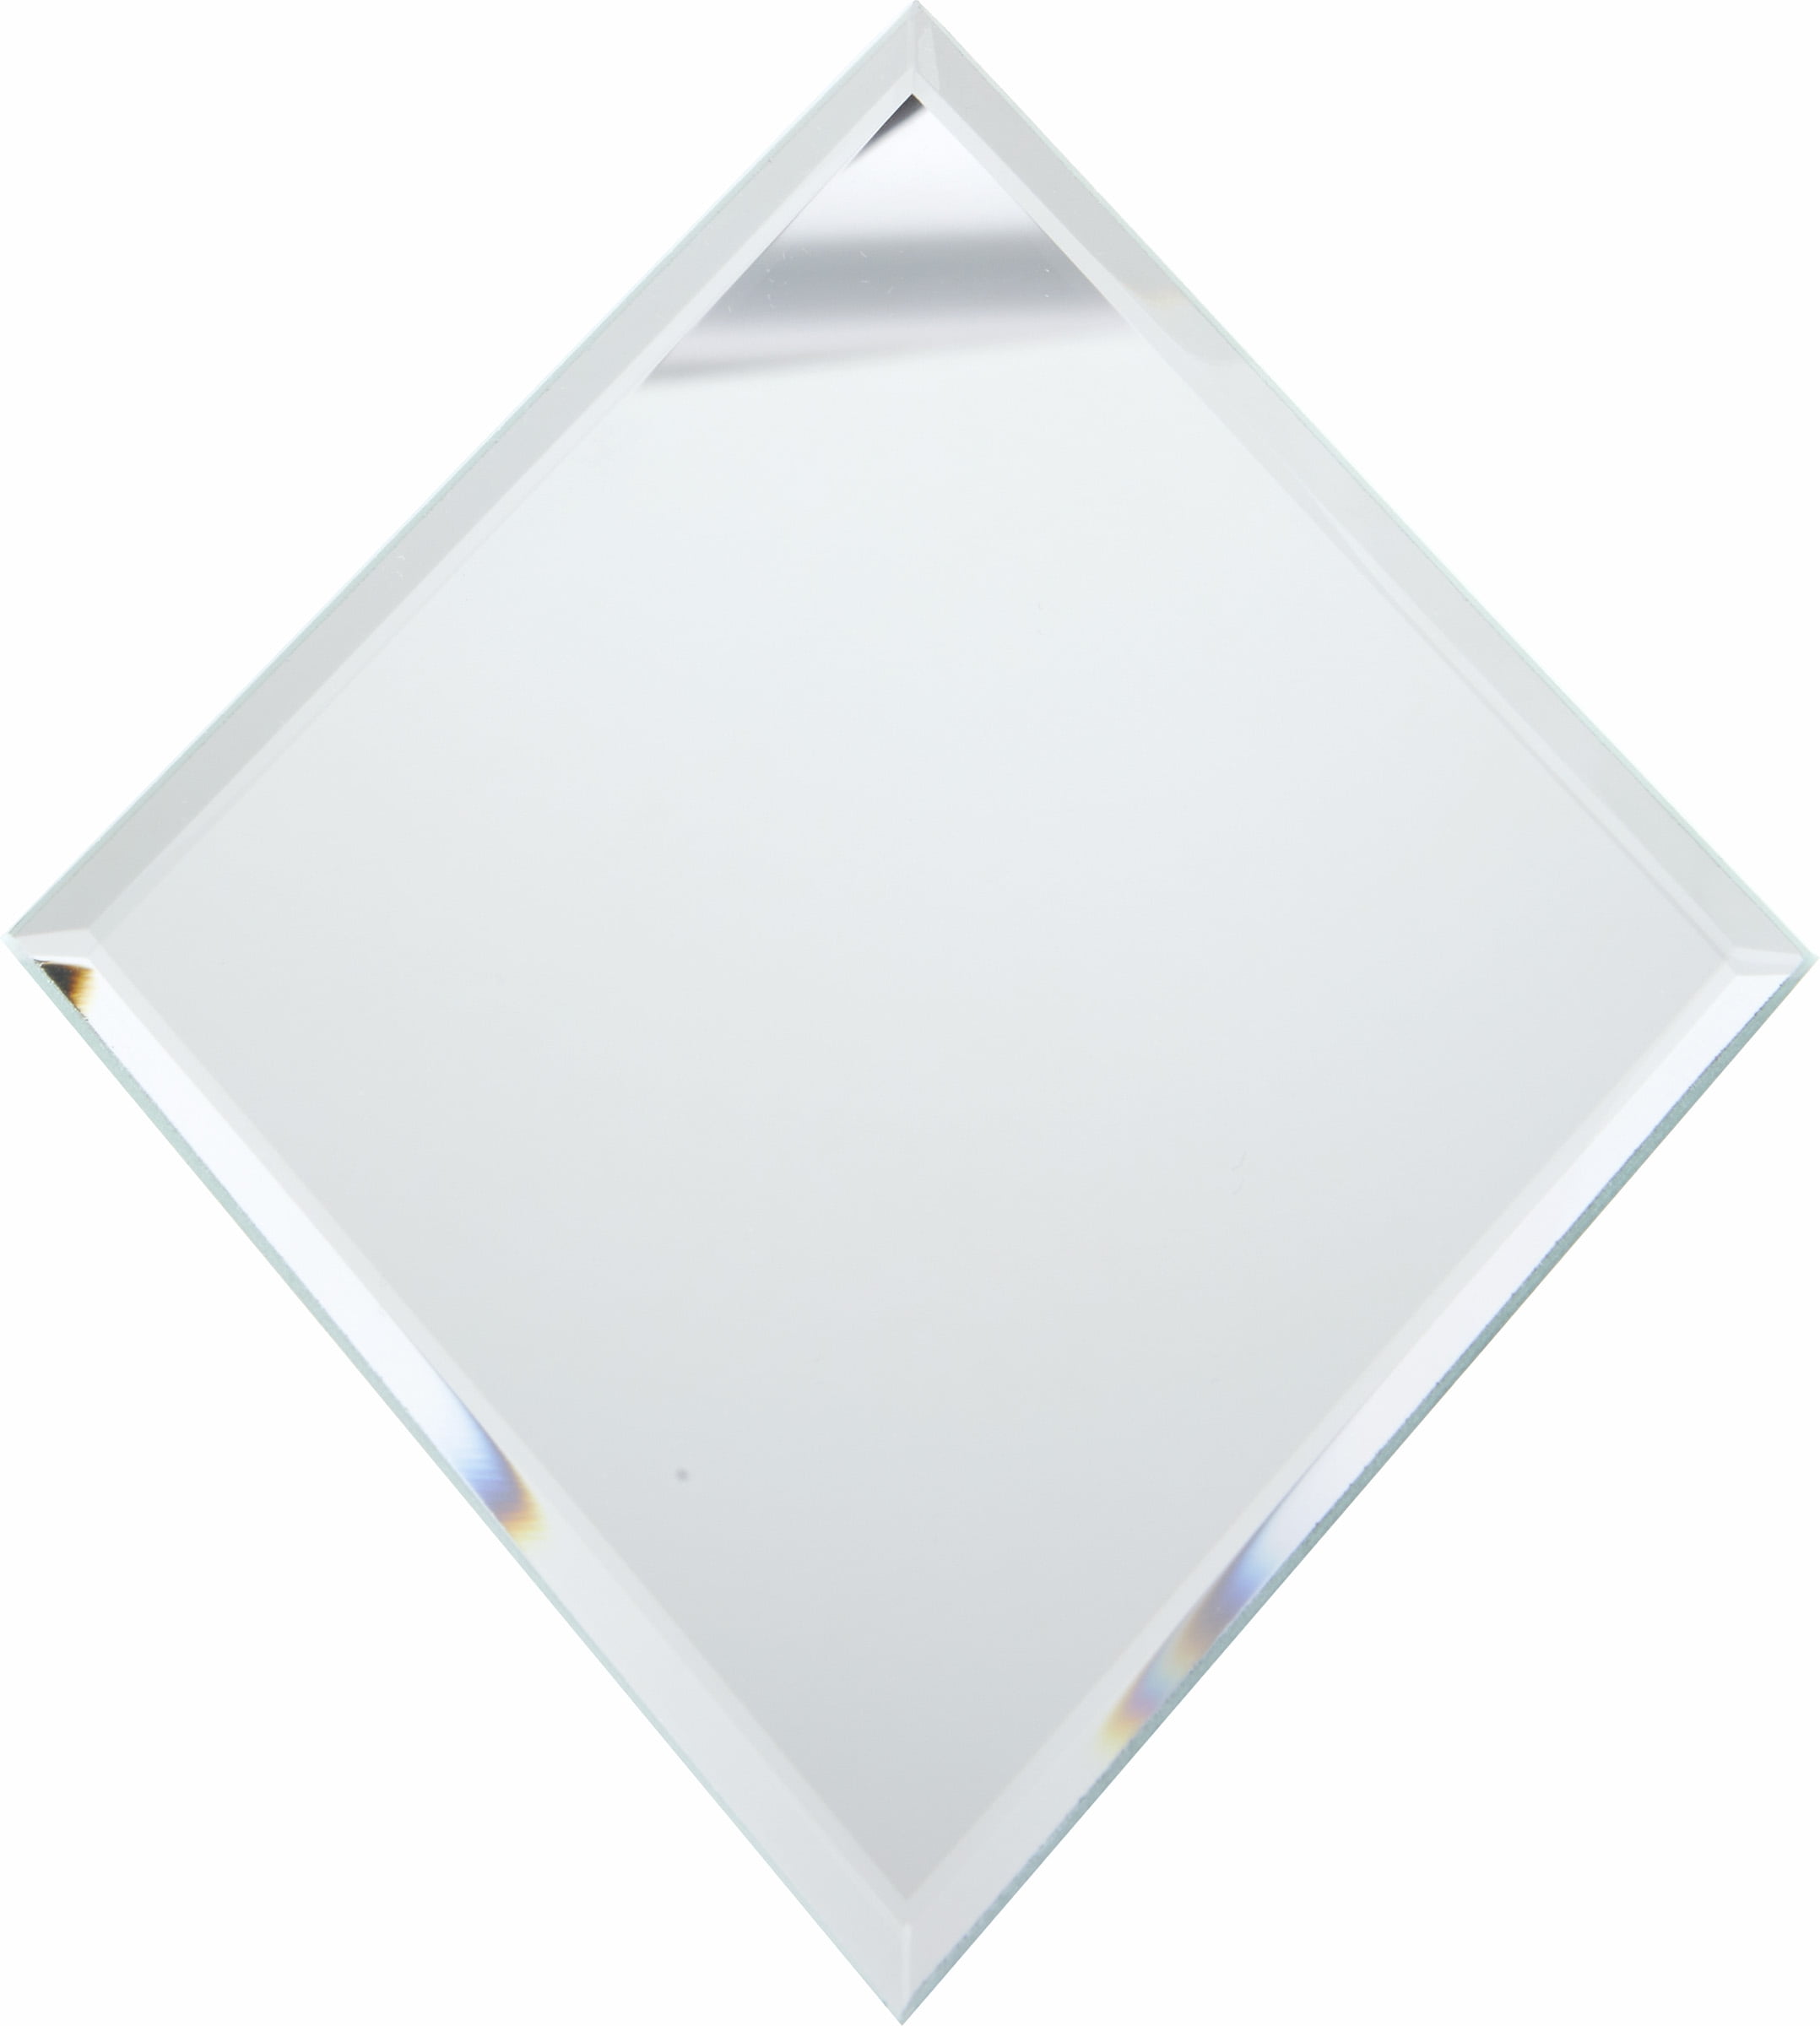 Pack of 12 Plymor Square 3mm Beveled Glass Mirror 2.5 inch x 2.5 inch 